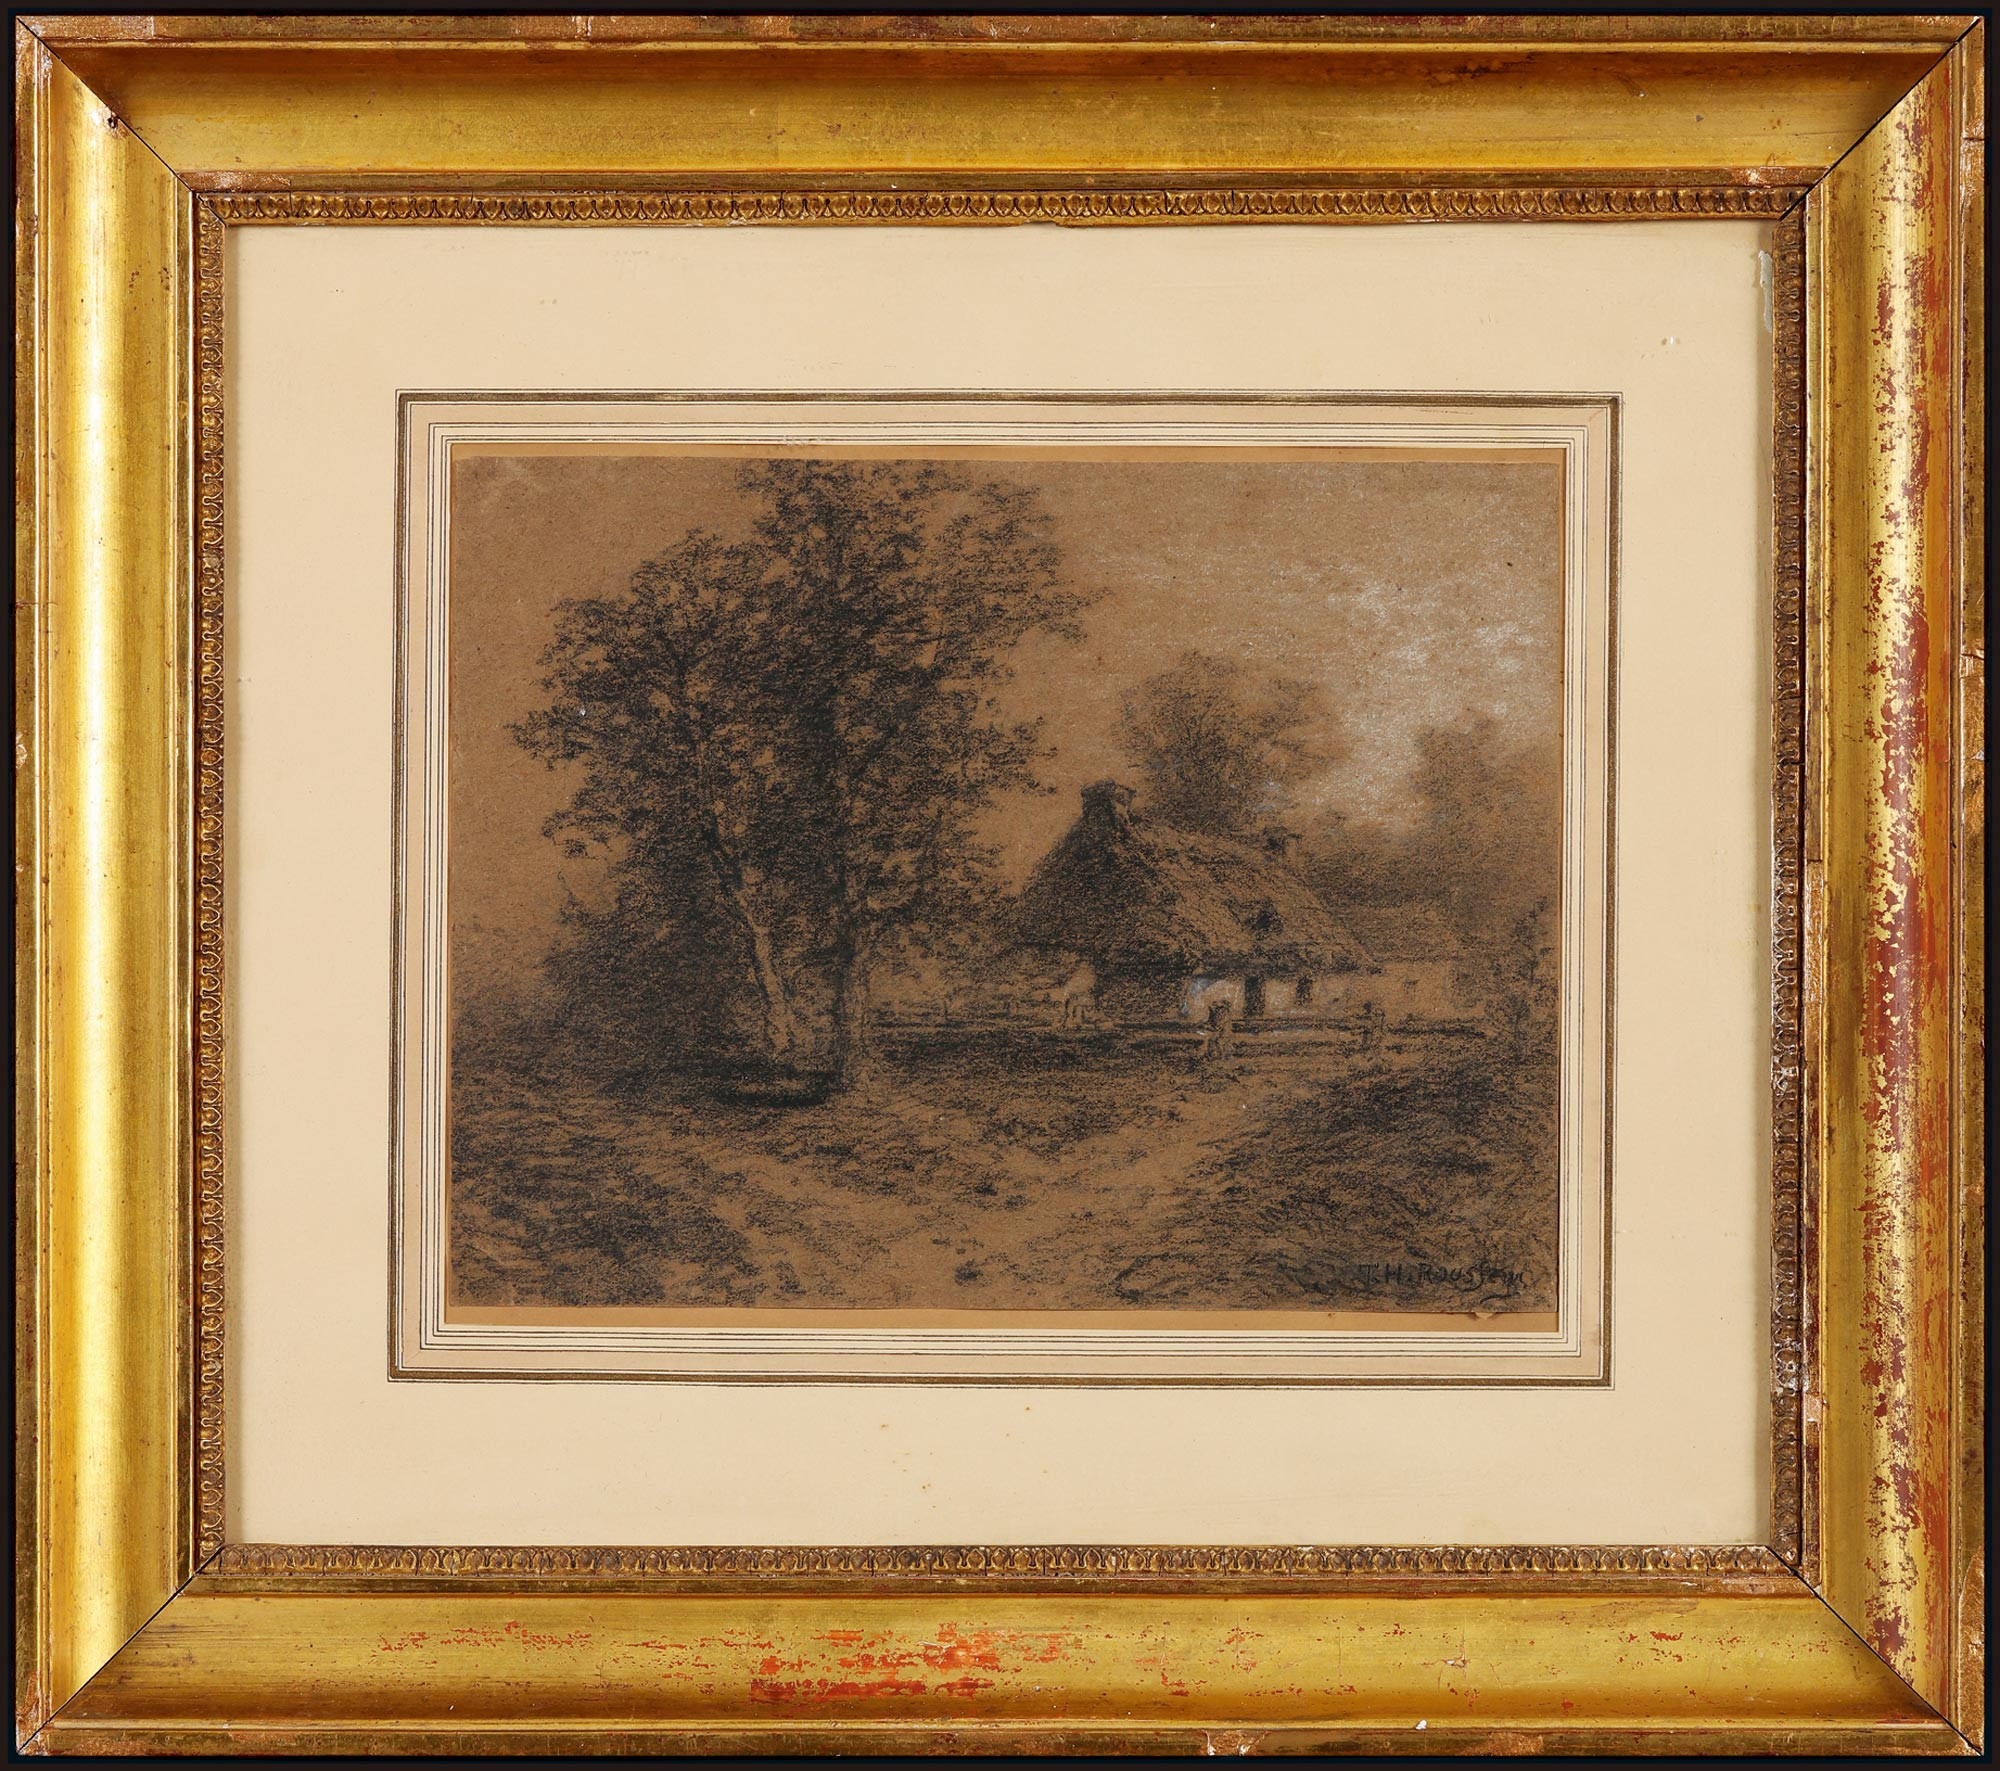 The “Sketch of Thatched Cottage in the Wood” by Théodore Rousseau, a leading figure of the Barbizon School and a famous French landscape painter, with a certificate